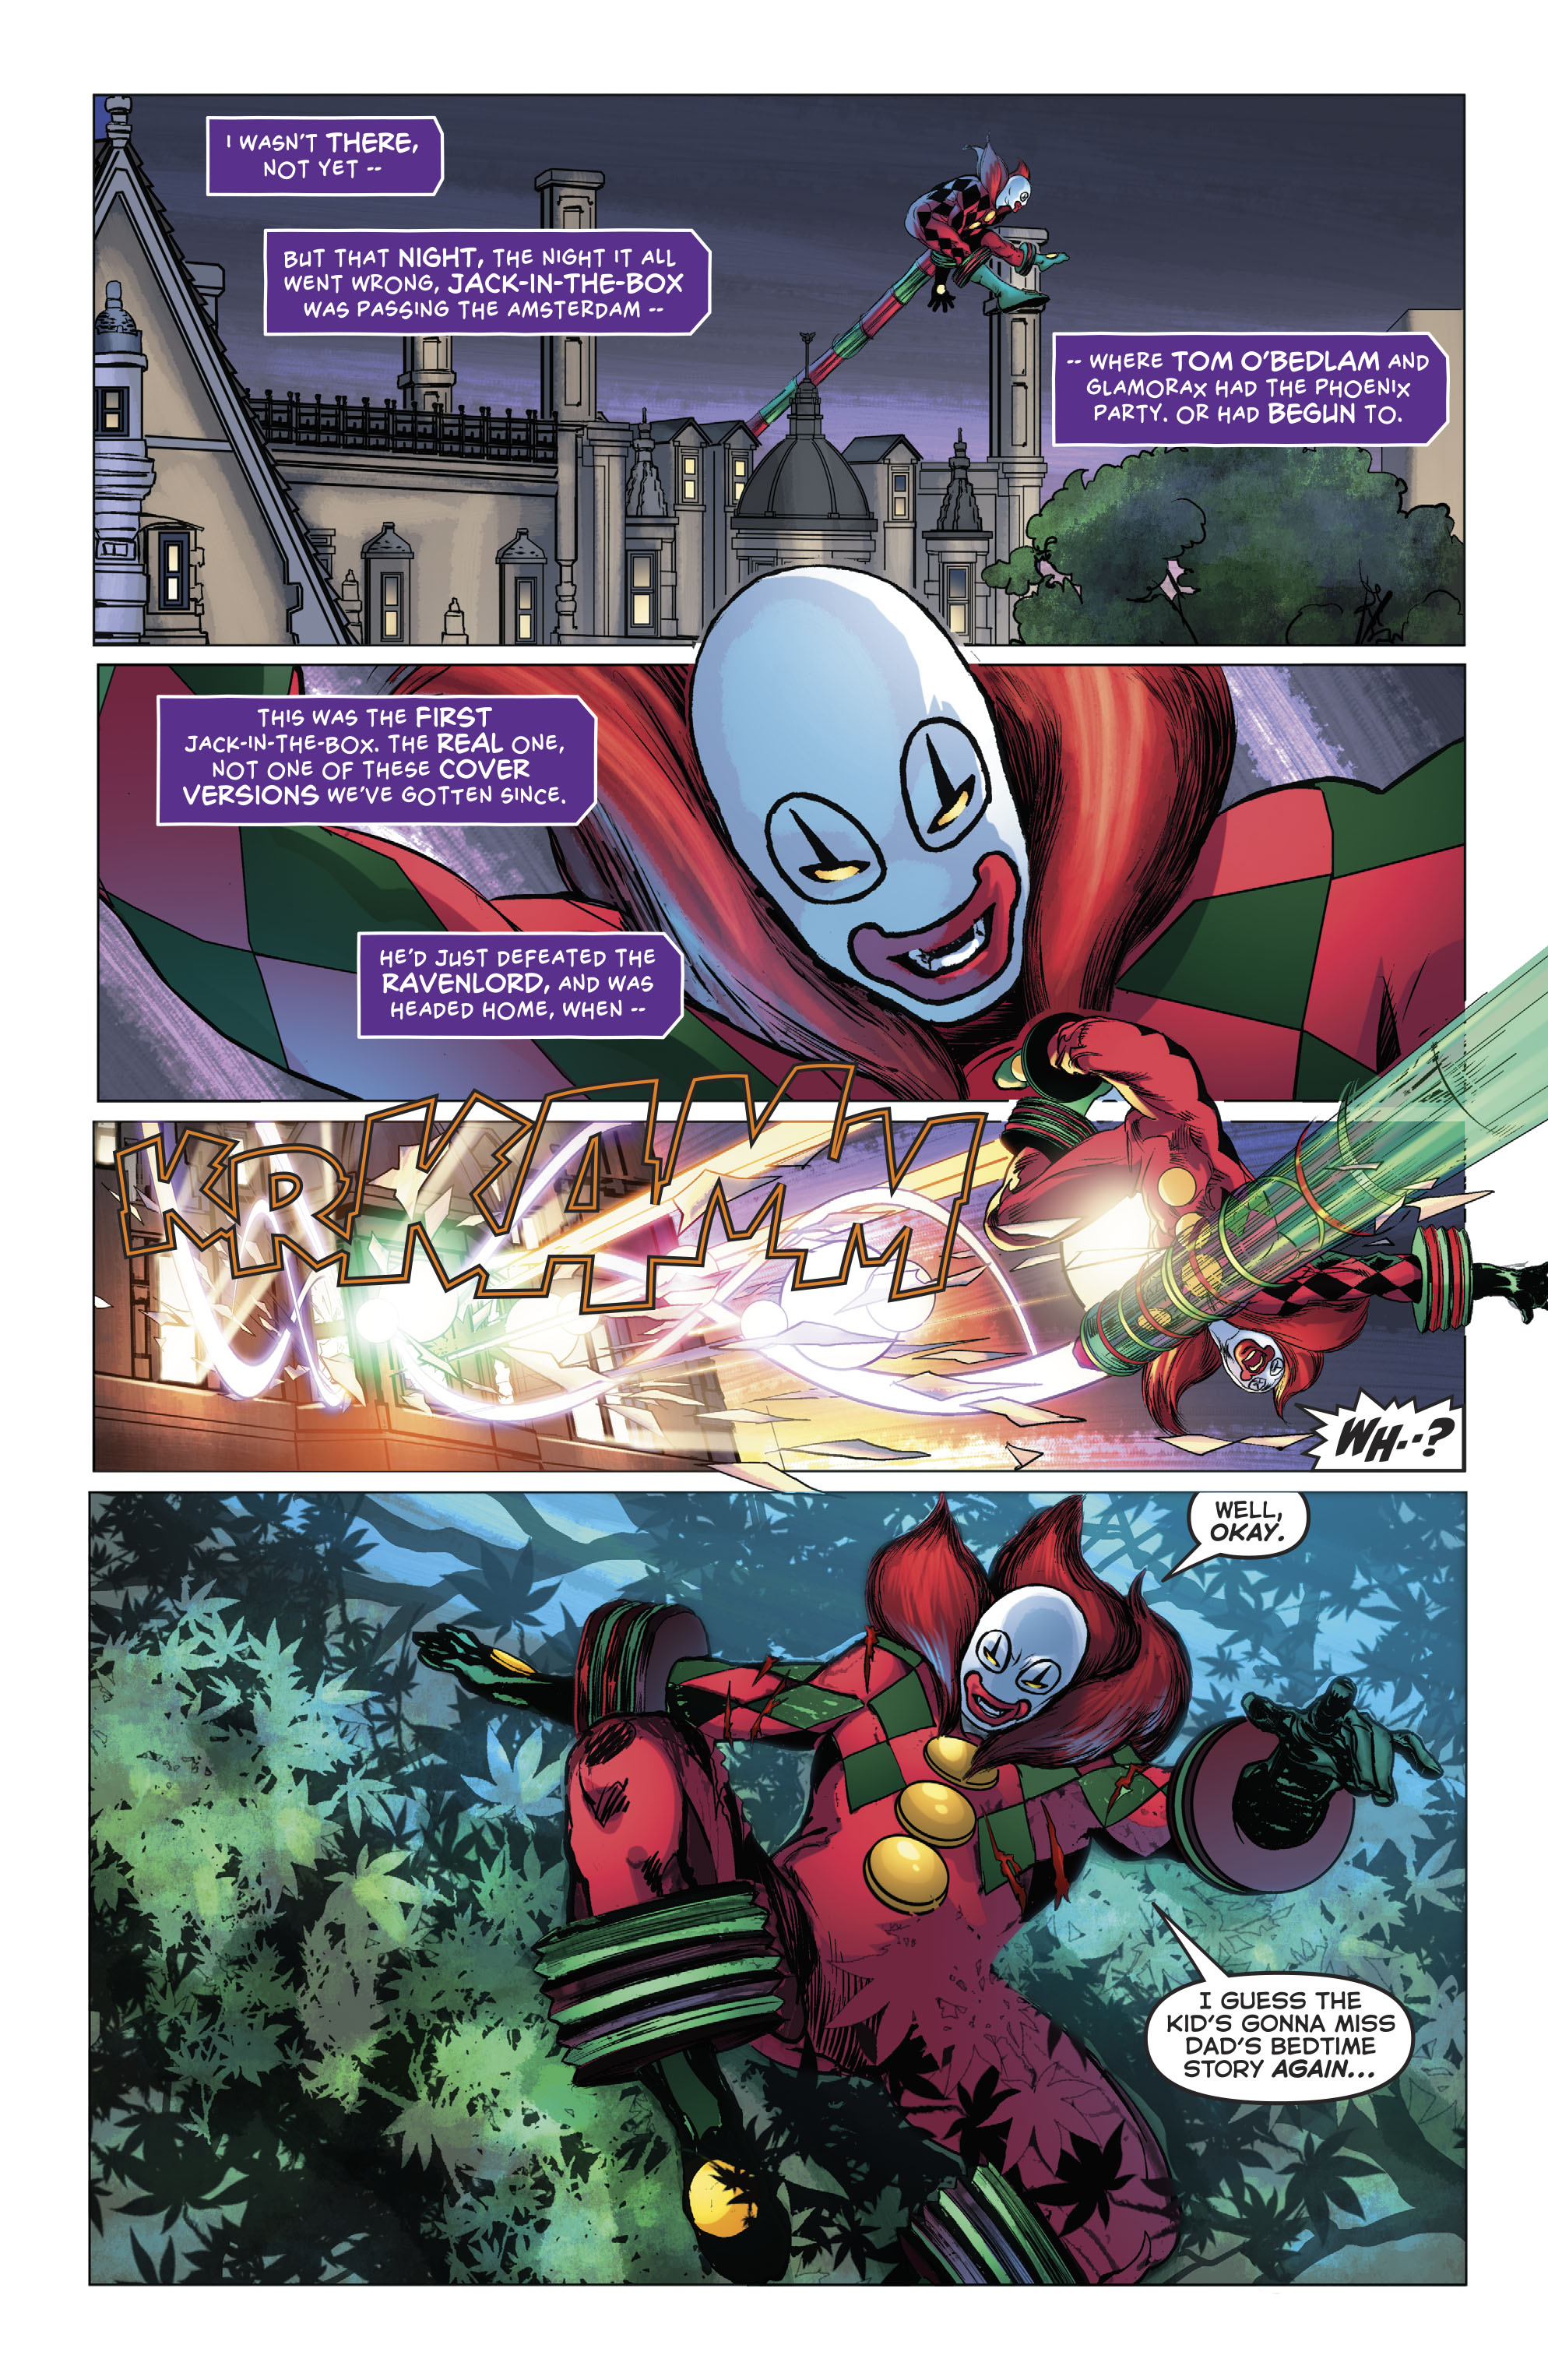 Astro City (2013-): Chapter 46 - Page 2